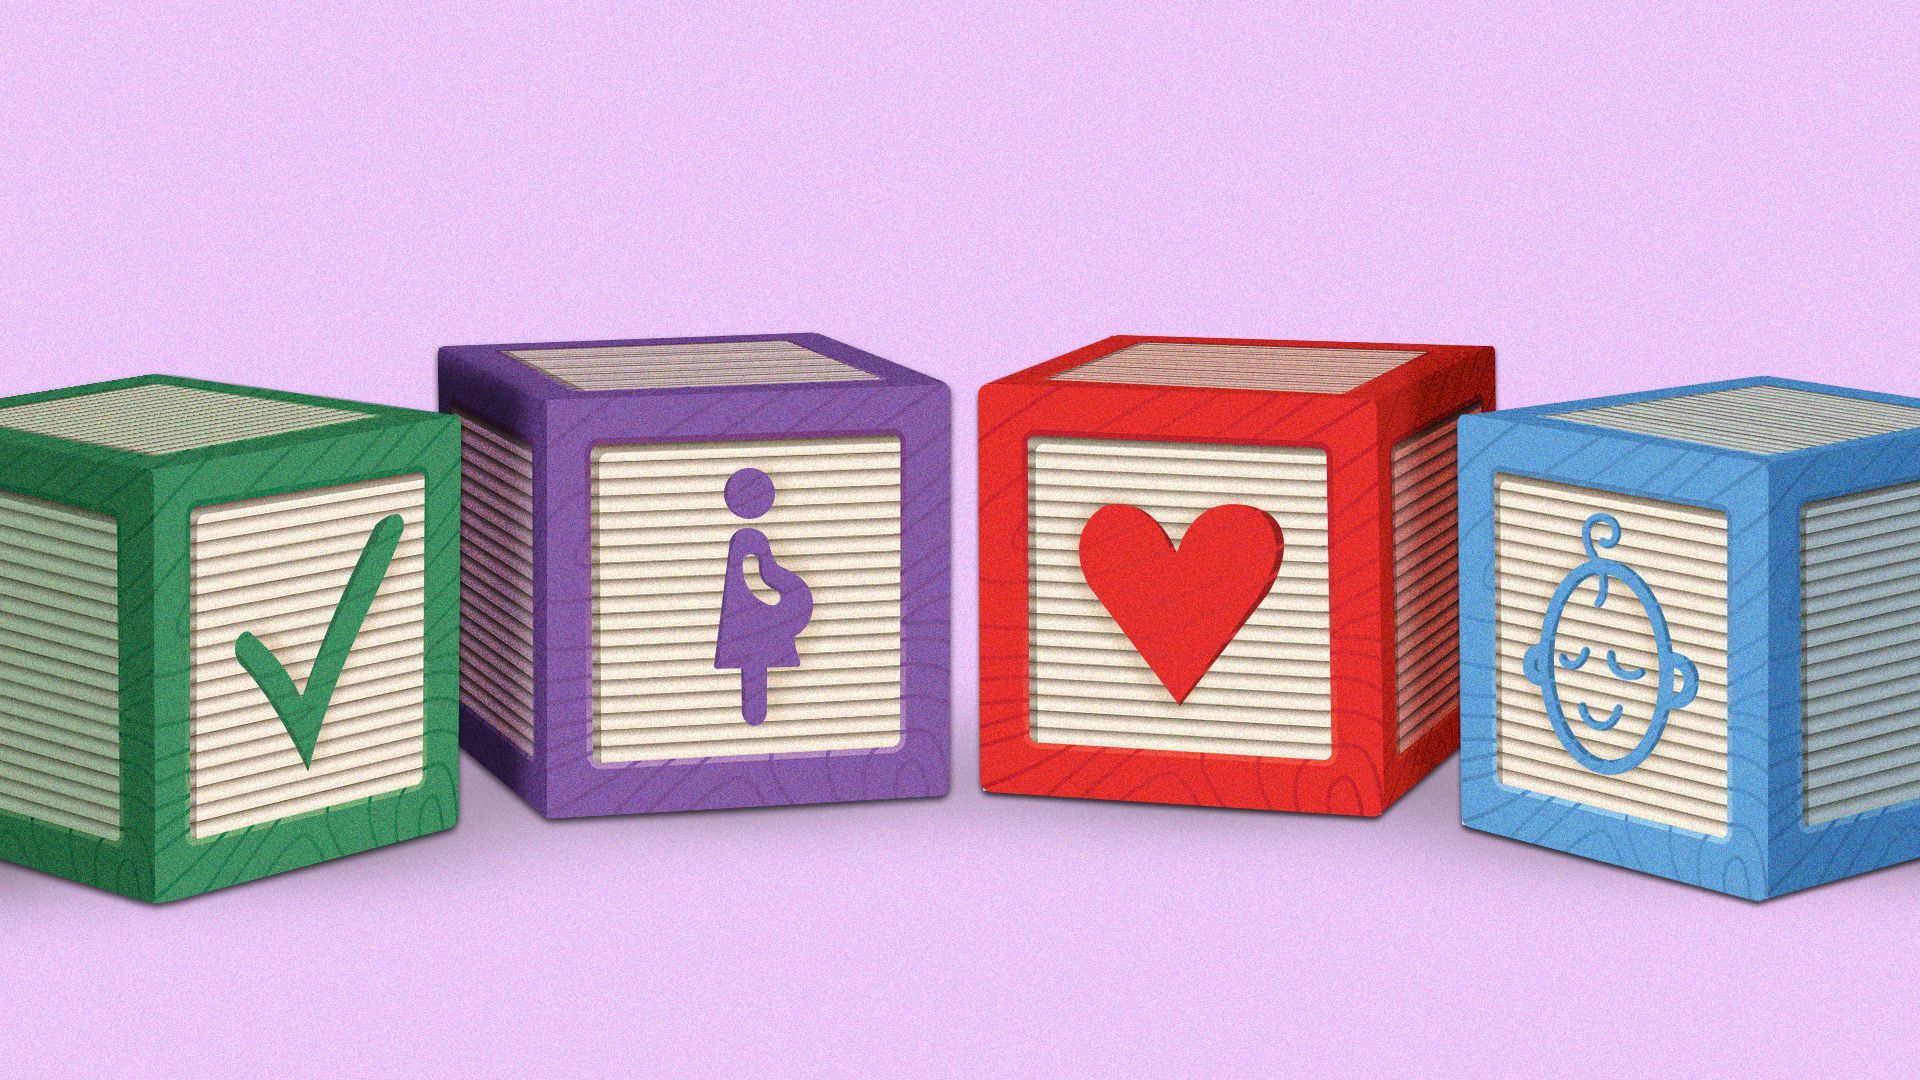 Illustration of four toy blocks with symbols of a check mark, a pregnant person, a heart, and a baby.